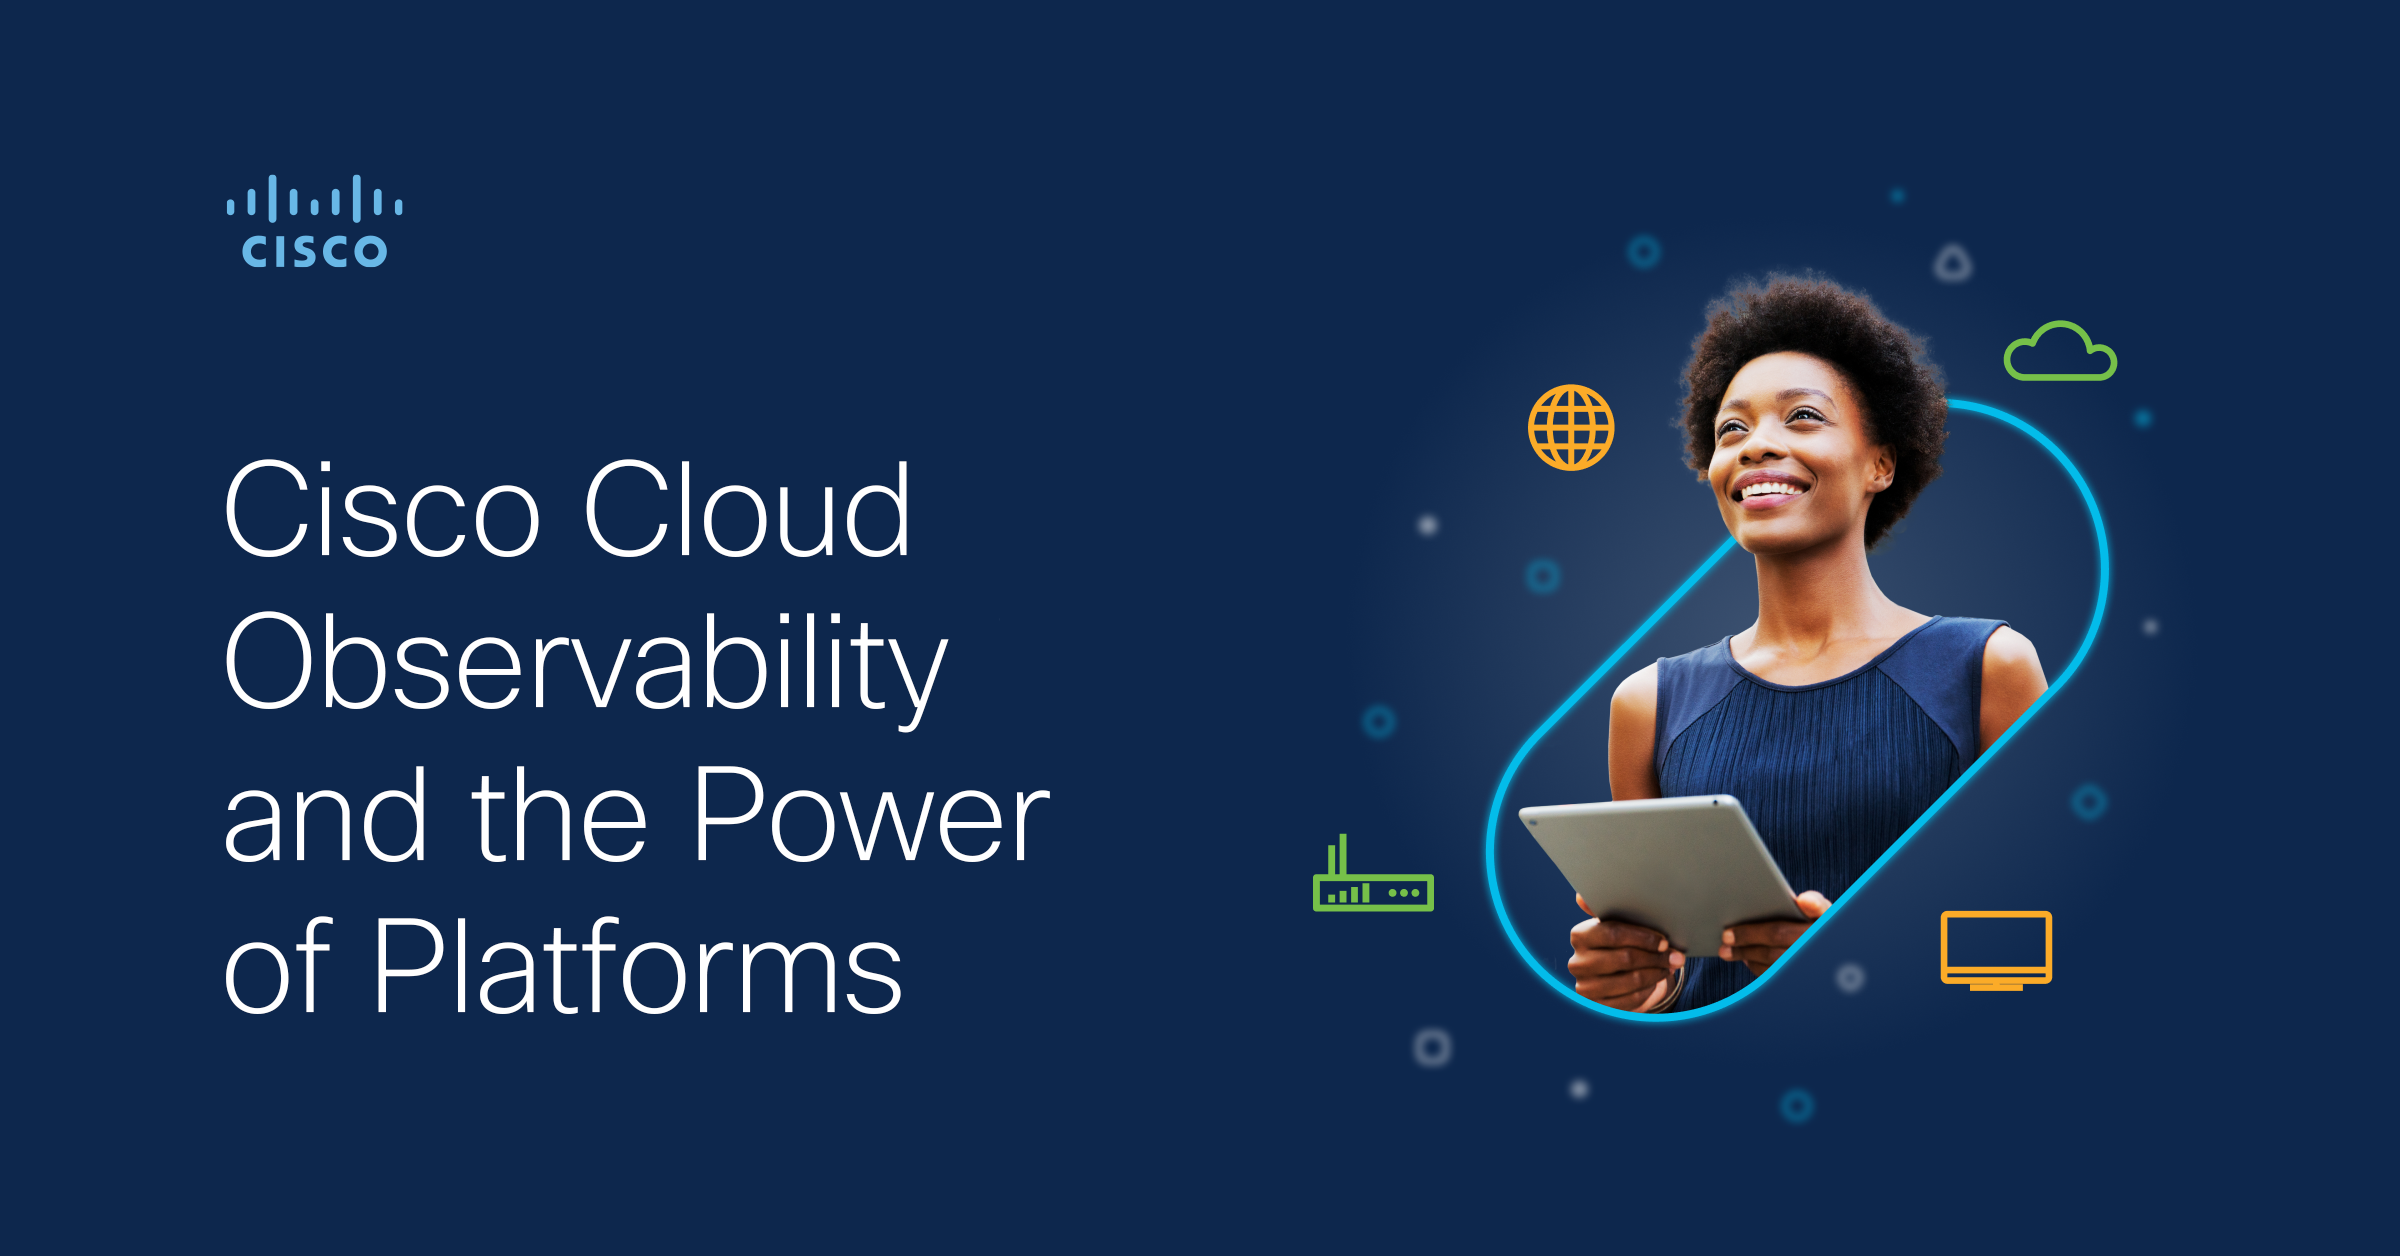 Cisco cloud observability and the power of platforms